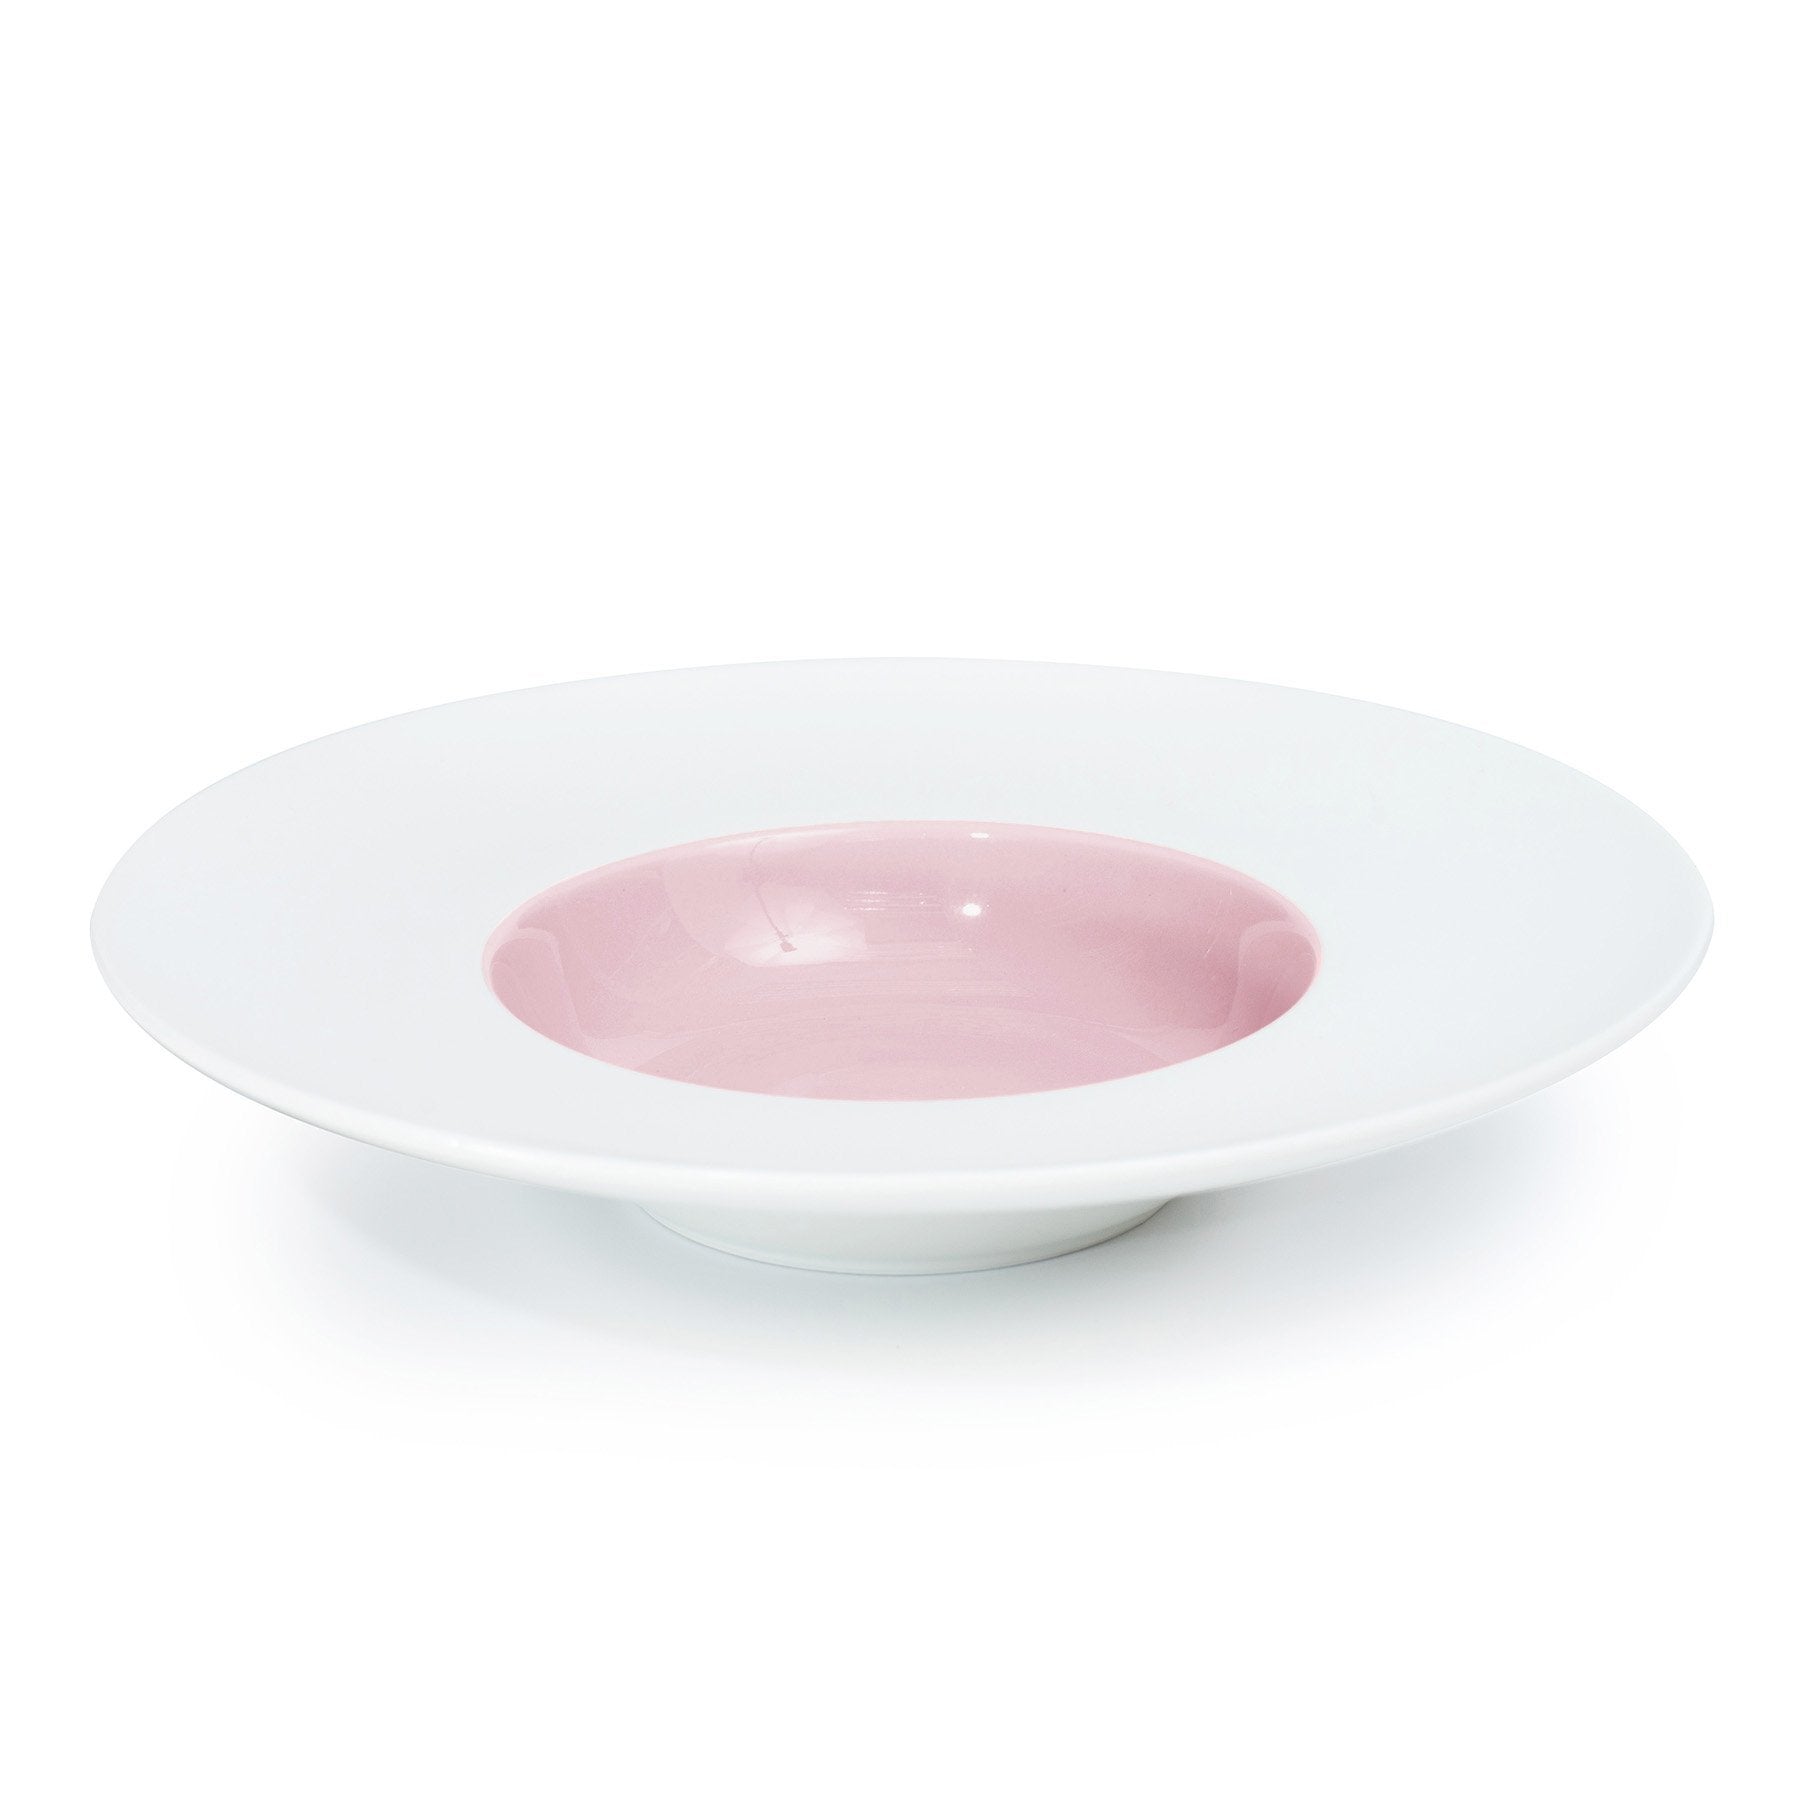 Cozy Pink by Don Bellini, Pasta Plate